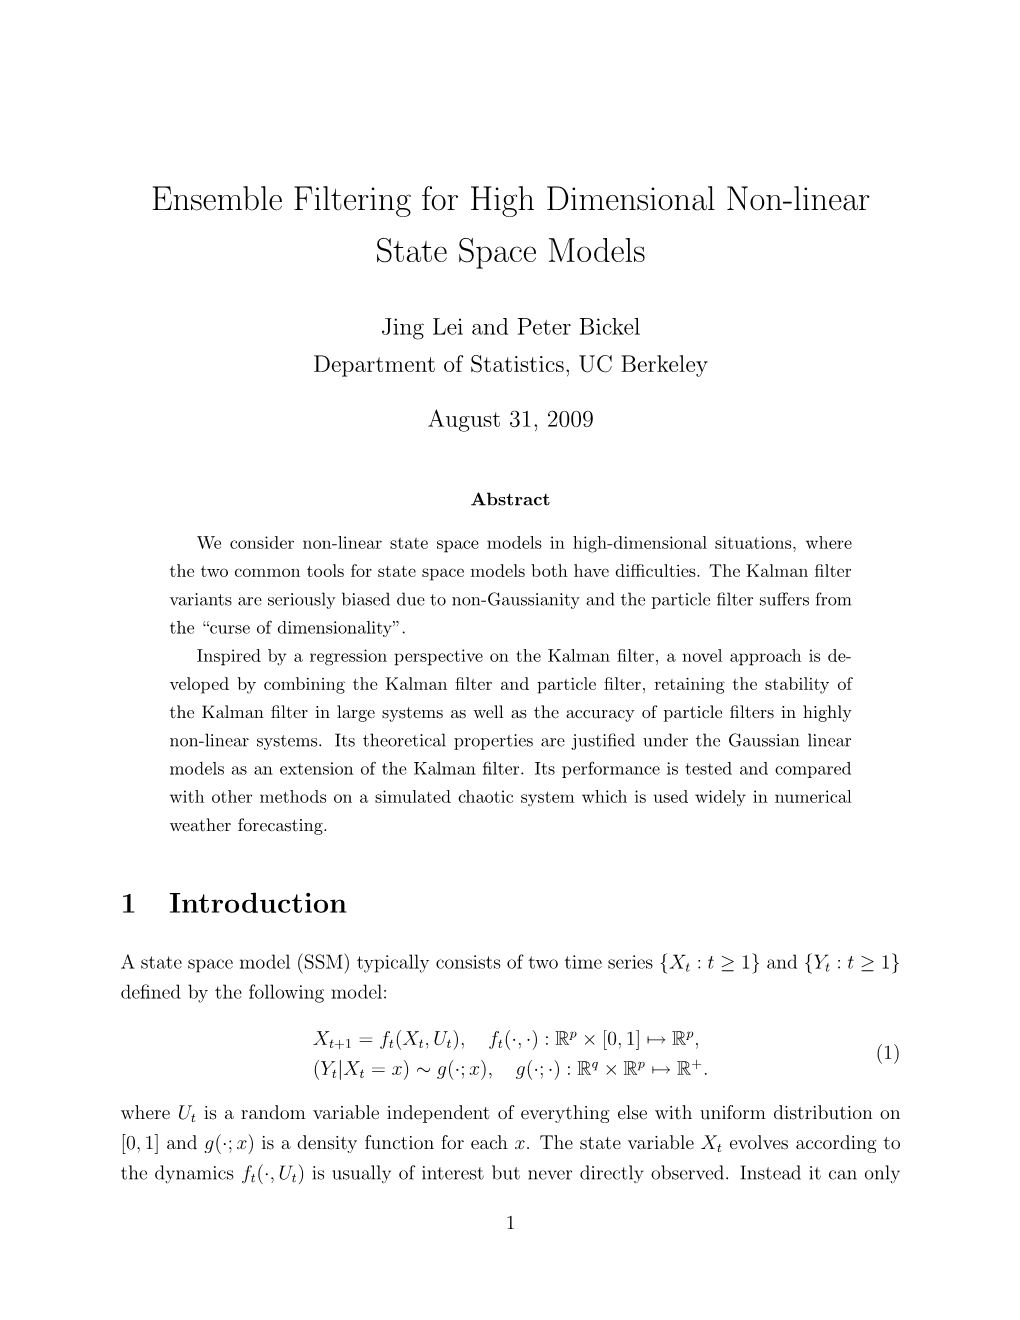 Ensemble Filtering for High Dimensional Non-Linear State Space Models